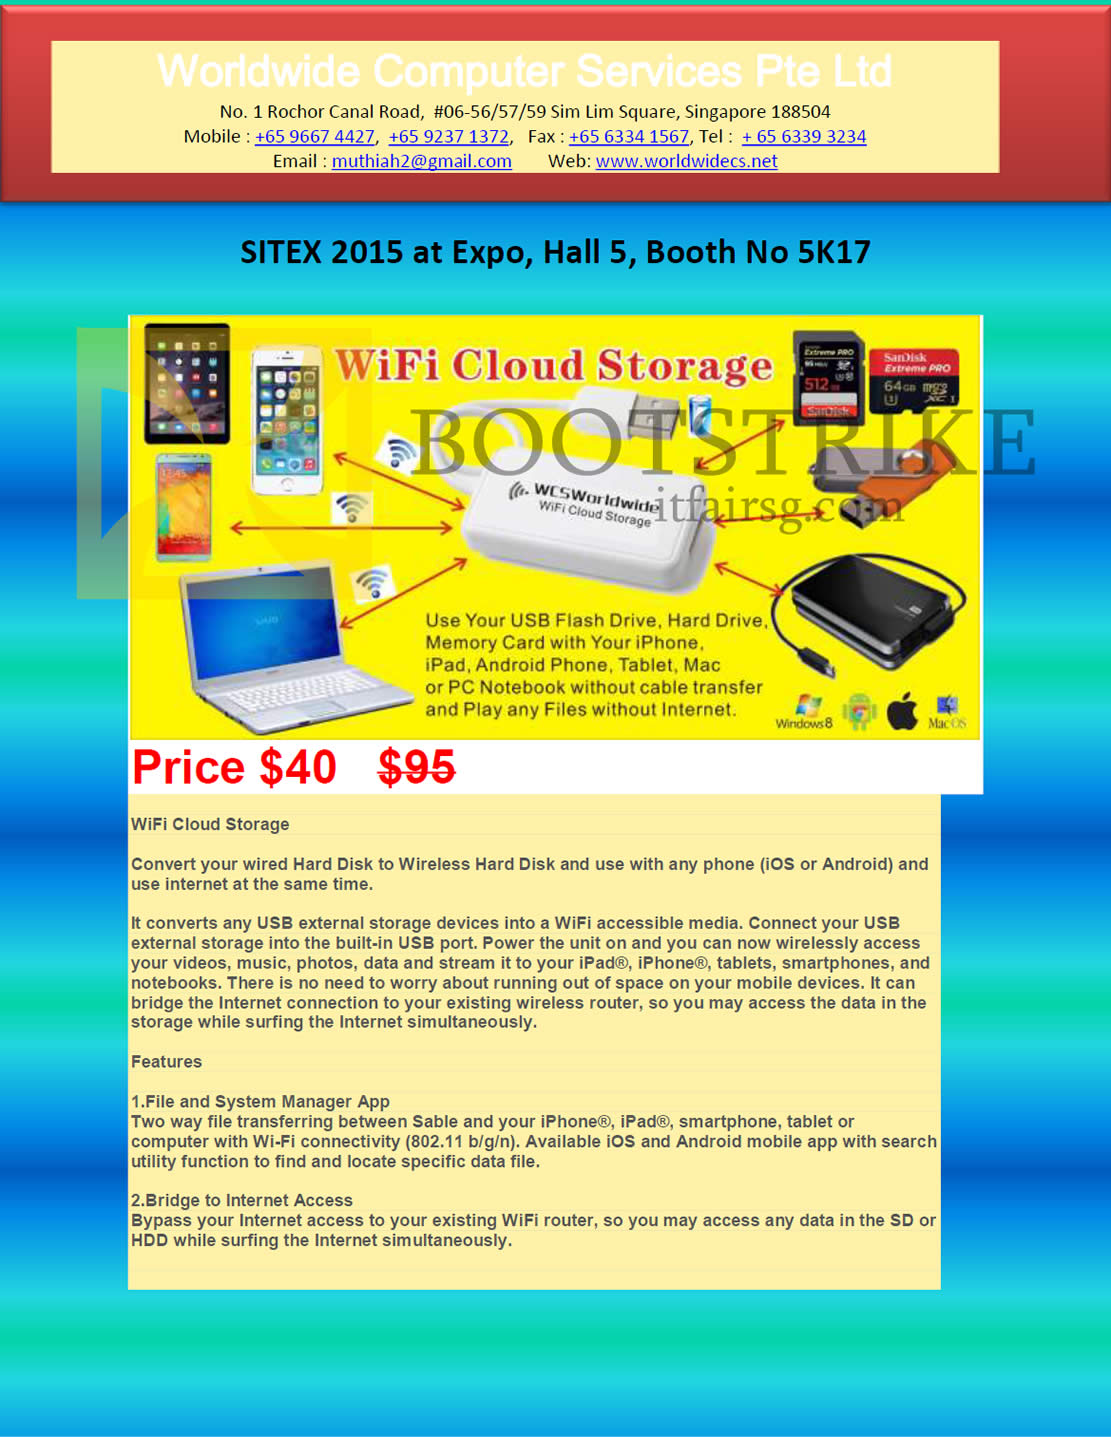 SITEX 2015 price list image brochure of Worldwide Computer Services WiFi Cloud Storage